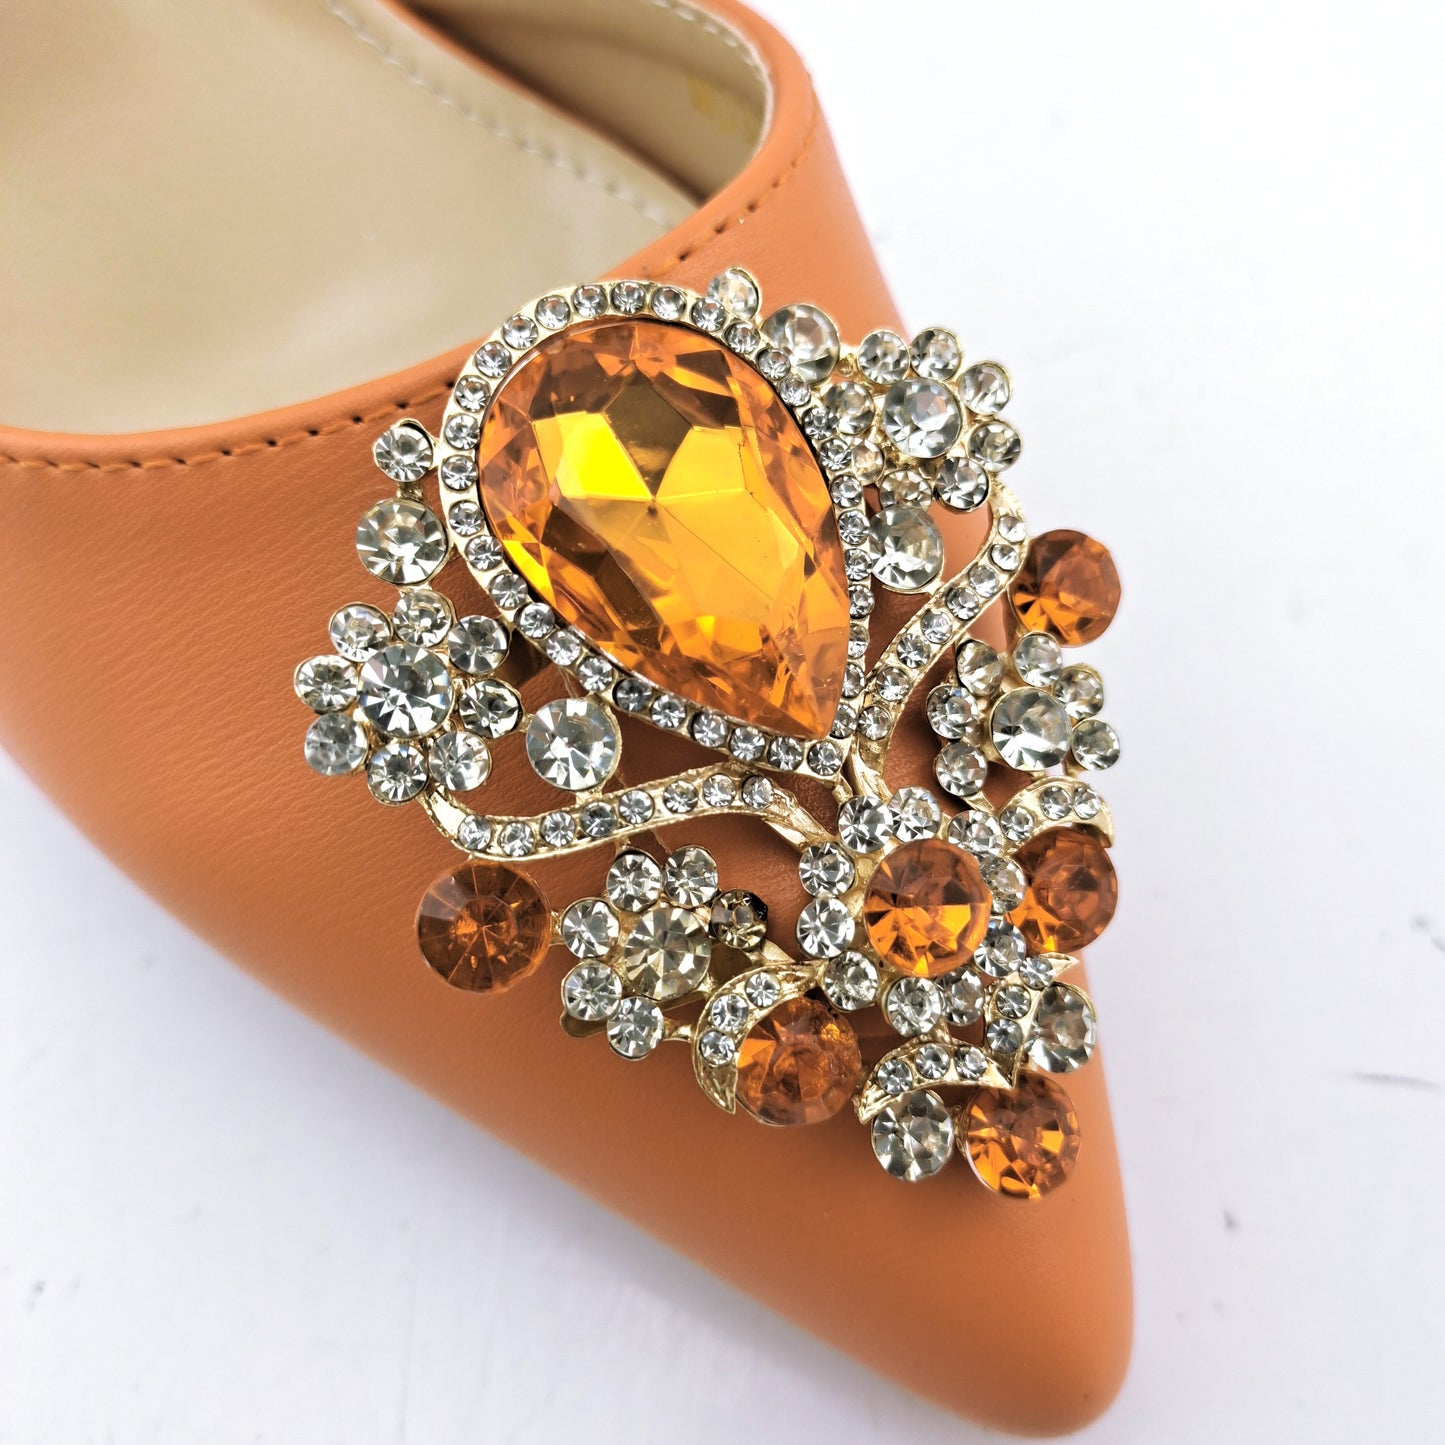 QSGFC 2022 Newest Noble and Elegant Classic vintage rhinestone accessories Ladies Shoes and Bag Set in Gold Color